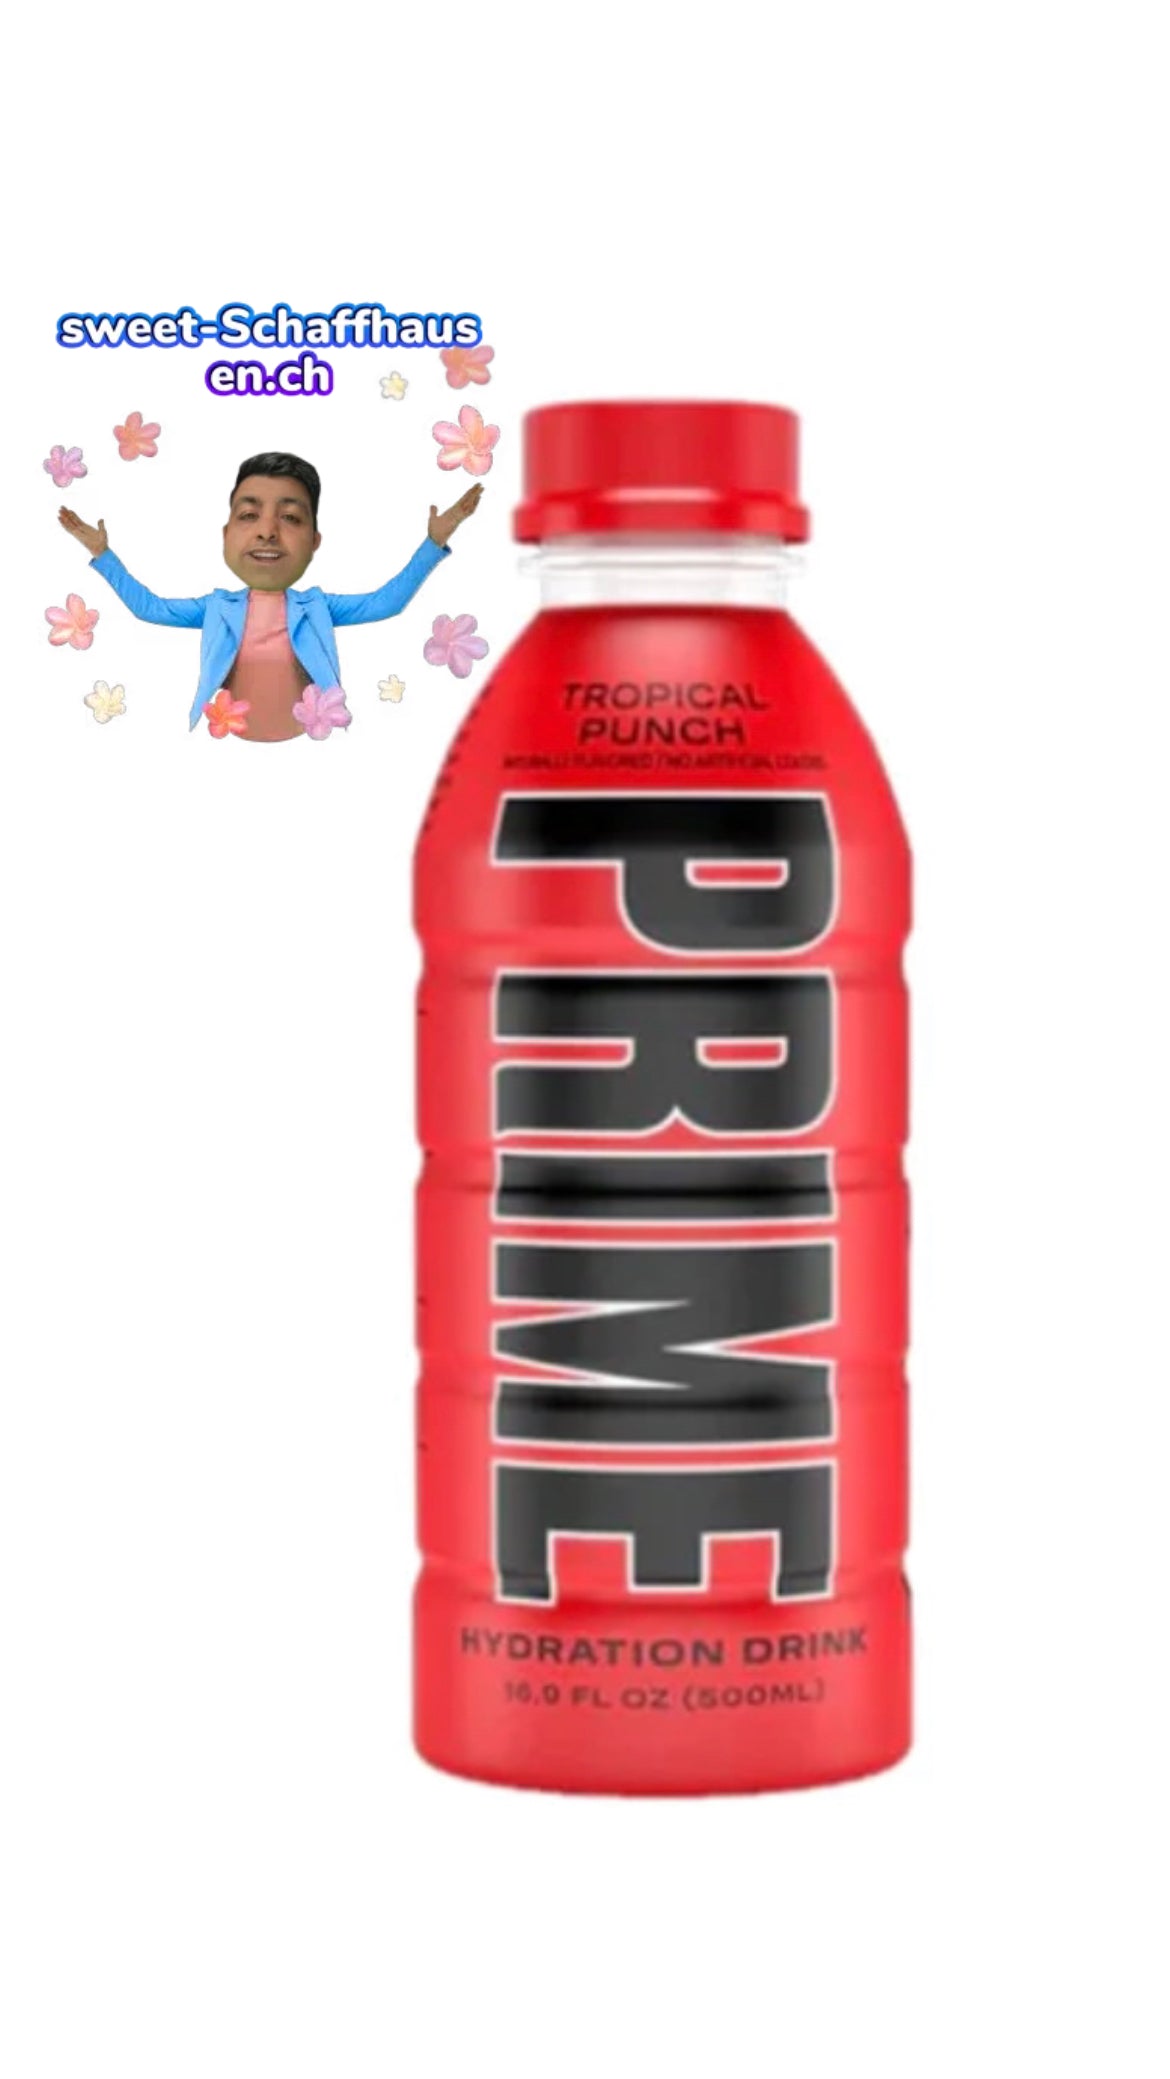 Prime Hydration Tropical Punch, 500ml